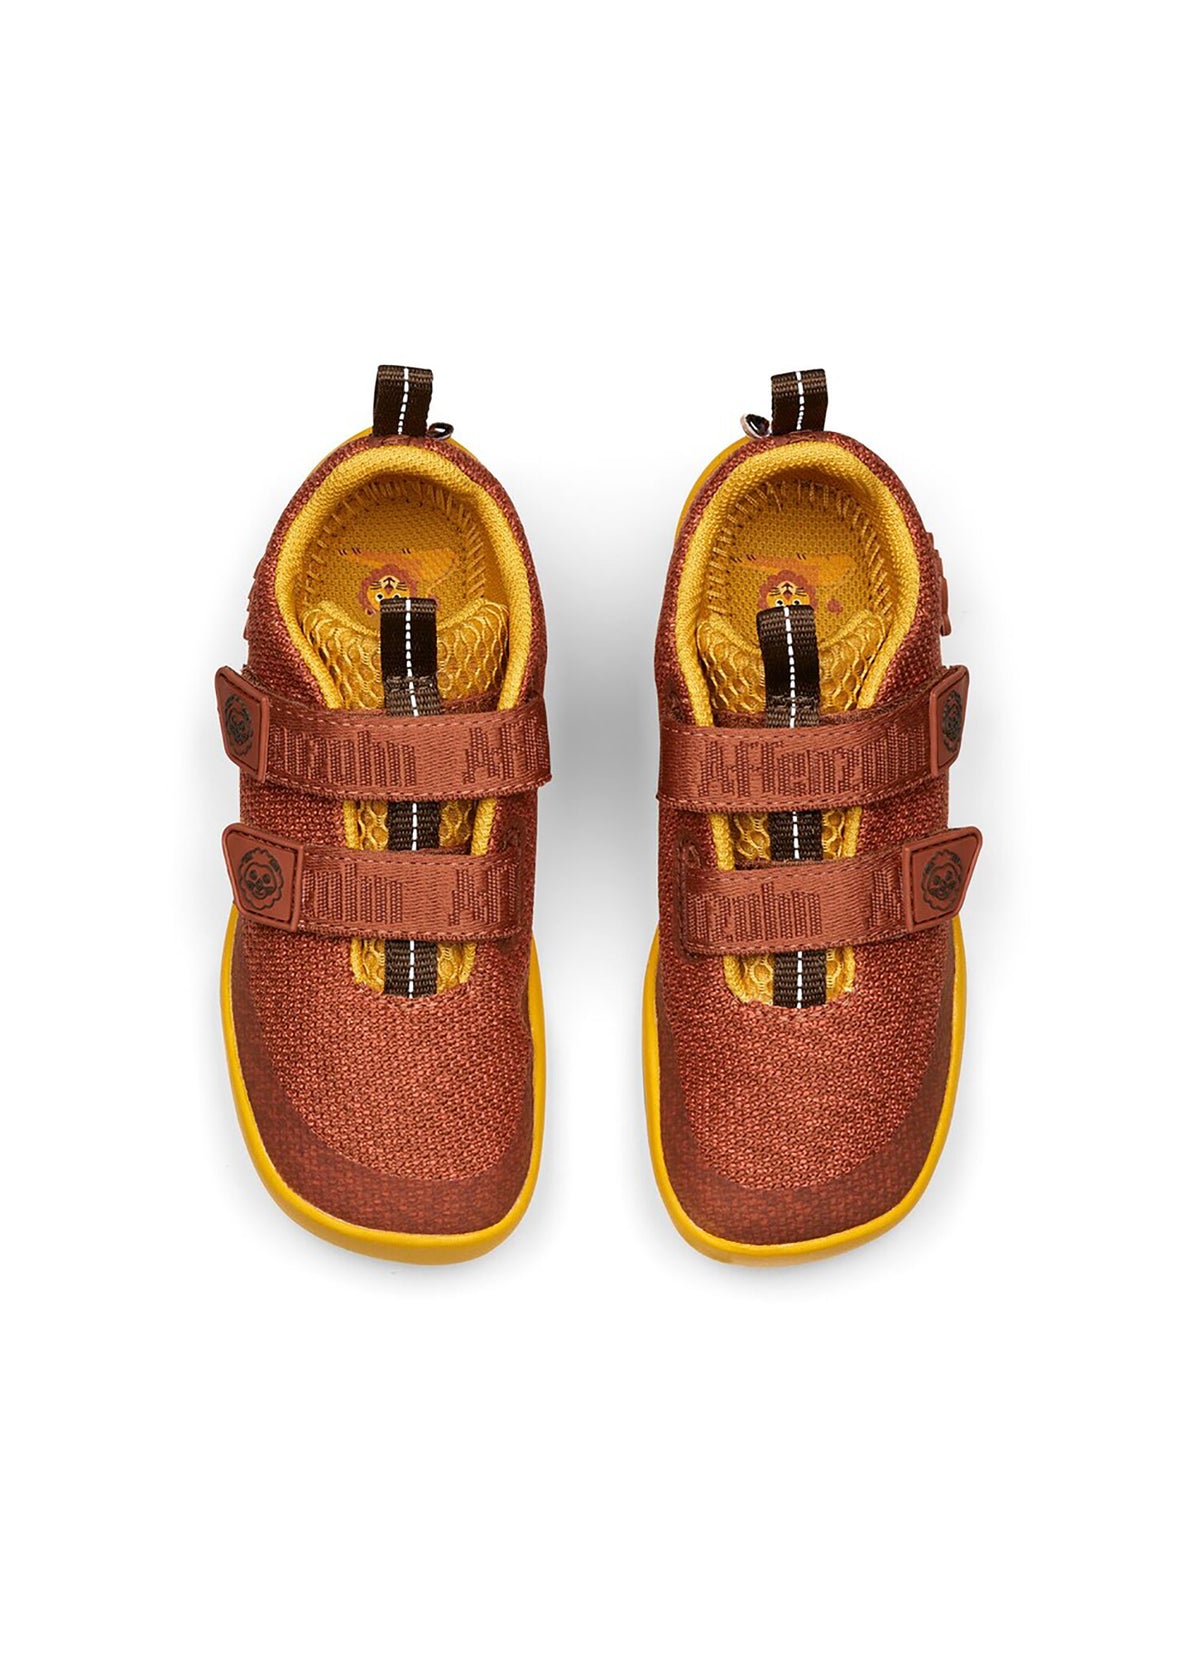 Children's barefoot sneakers - Knit Happy, Lion